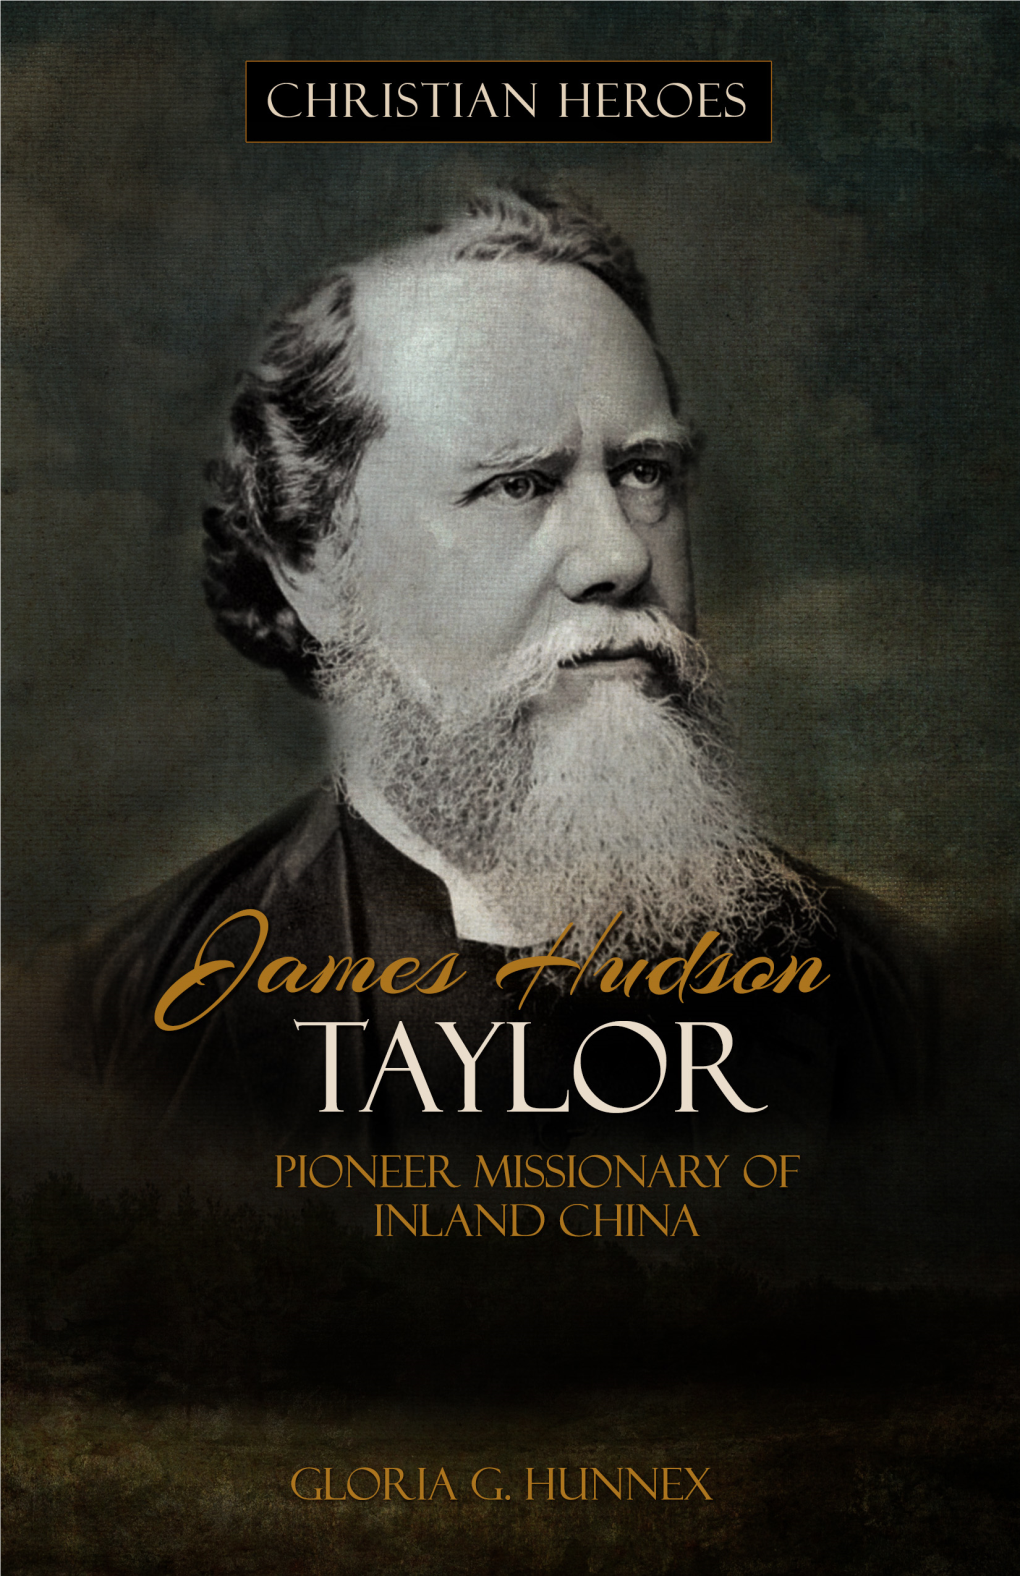 James Hudson Taylor: Pioneer Missionary of Inland China